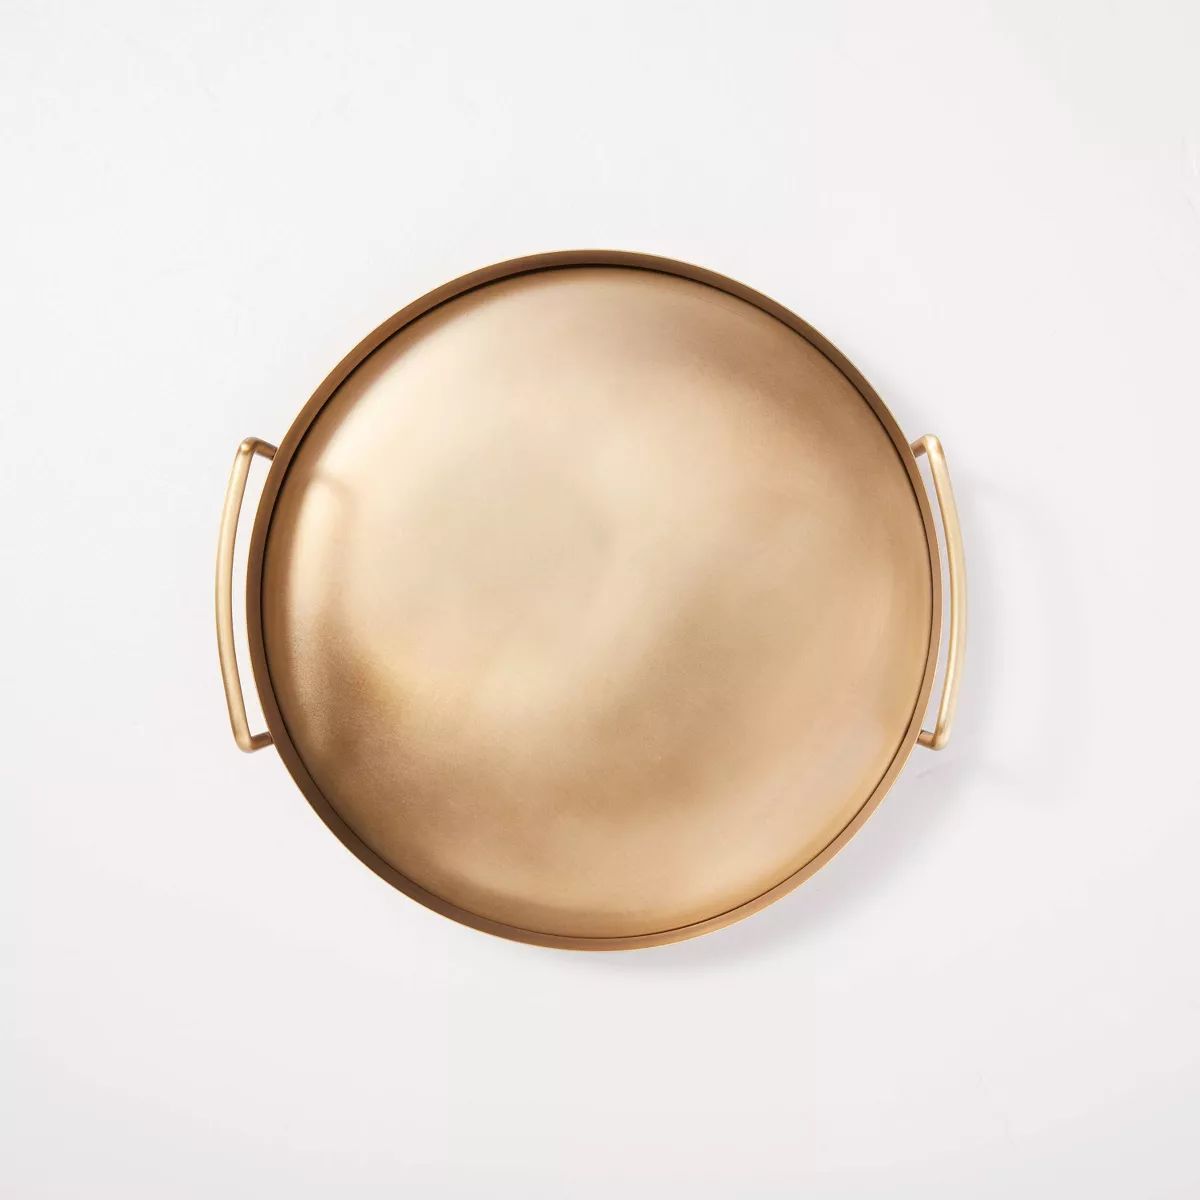 Beveled 11.9" Round Metal Decor Tray Brass Finish - Hearth & Hand™ with Magnolia | Target